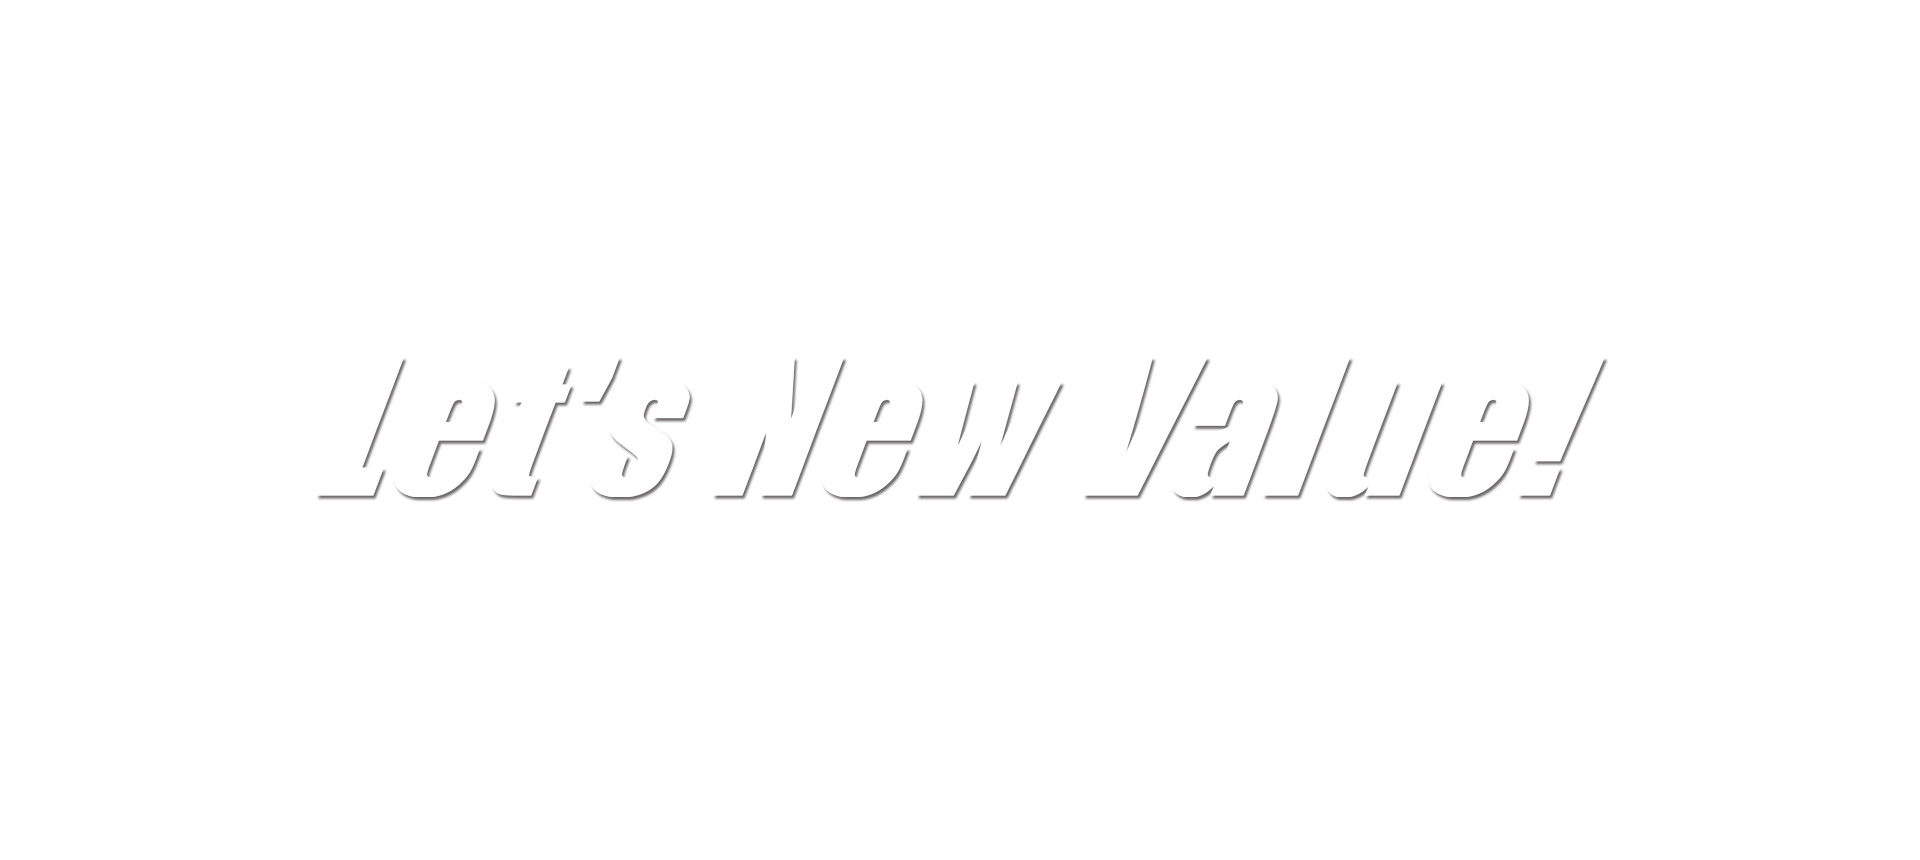 Let's New Value! 新たなる価値創造のための情報化戦略・技術戦略・人財戦略を実現します。